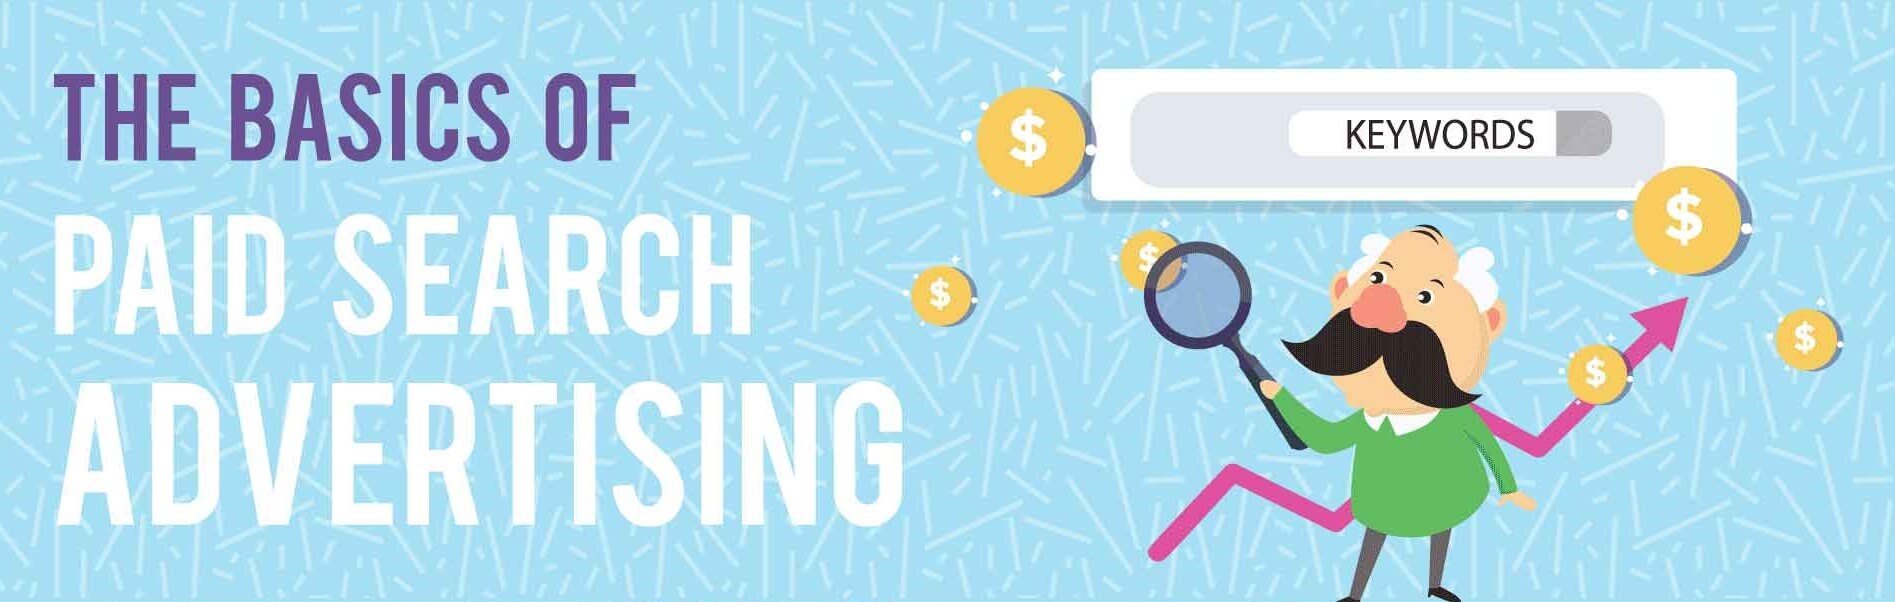 Basics of paid search advertising